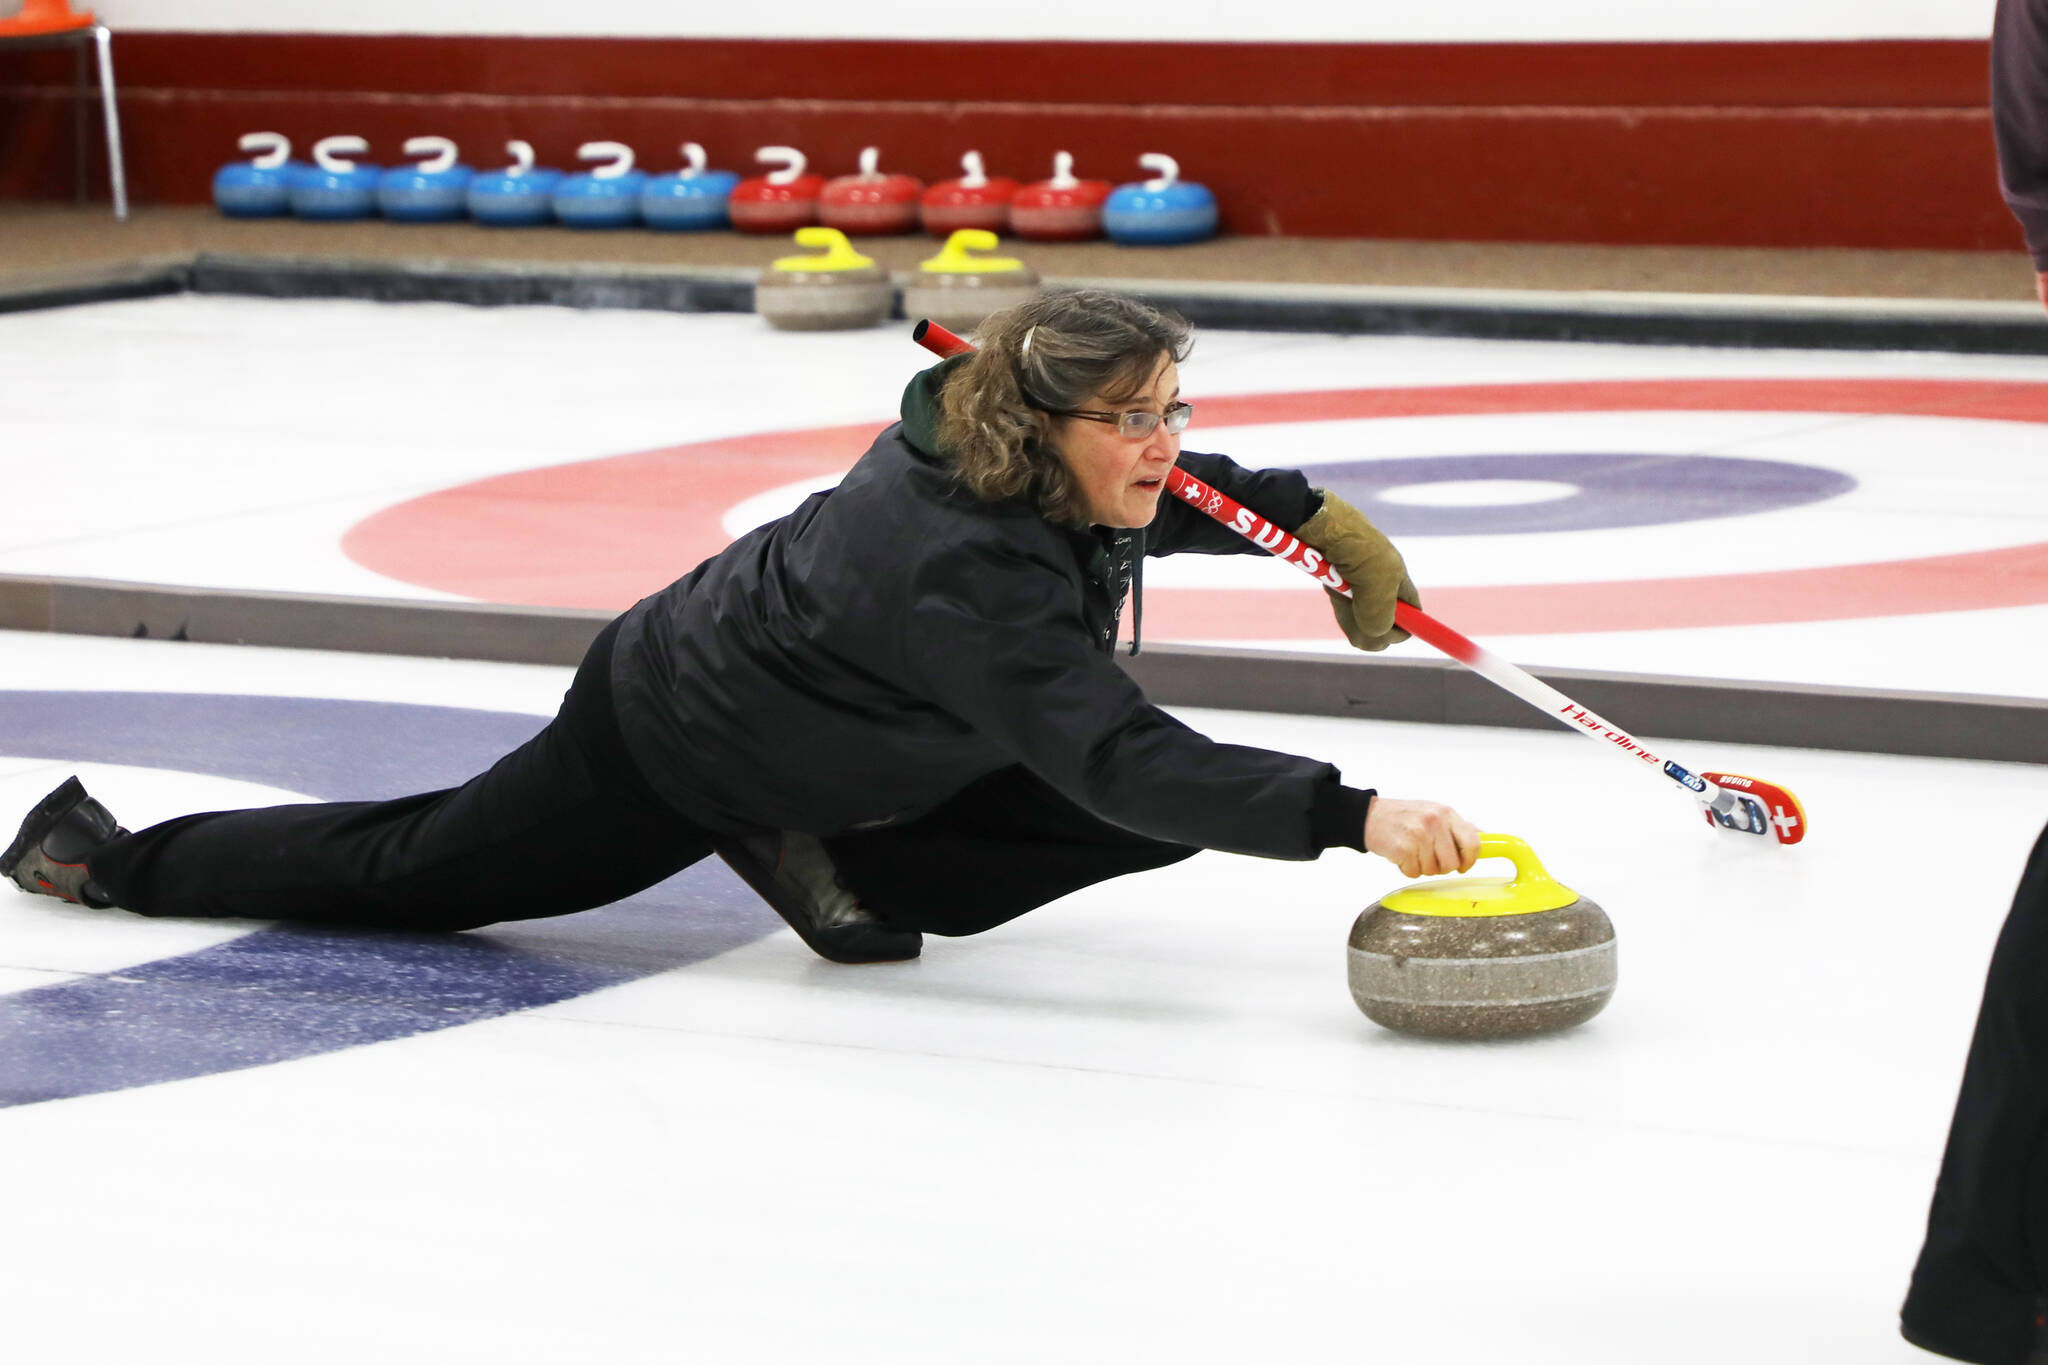 Do you know how many players are on a typical curling team? (Aman Parhar/Omineca Express)